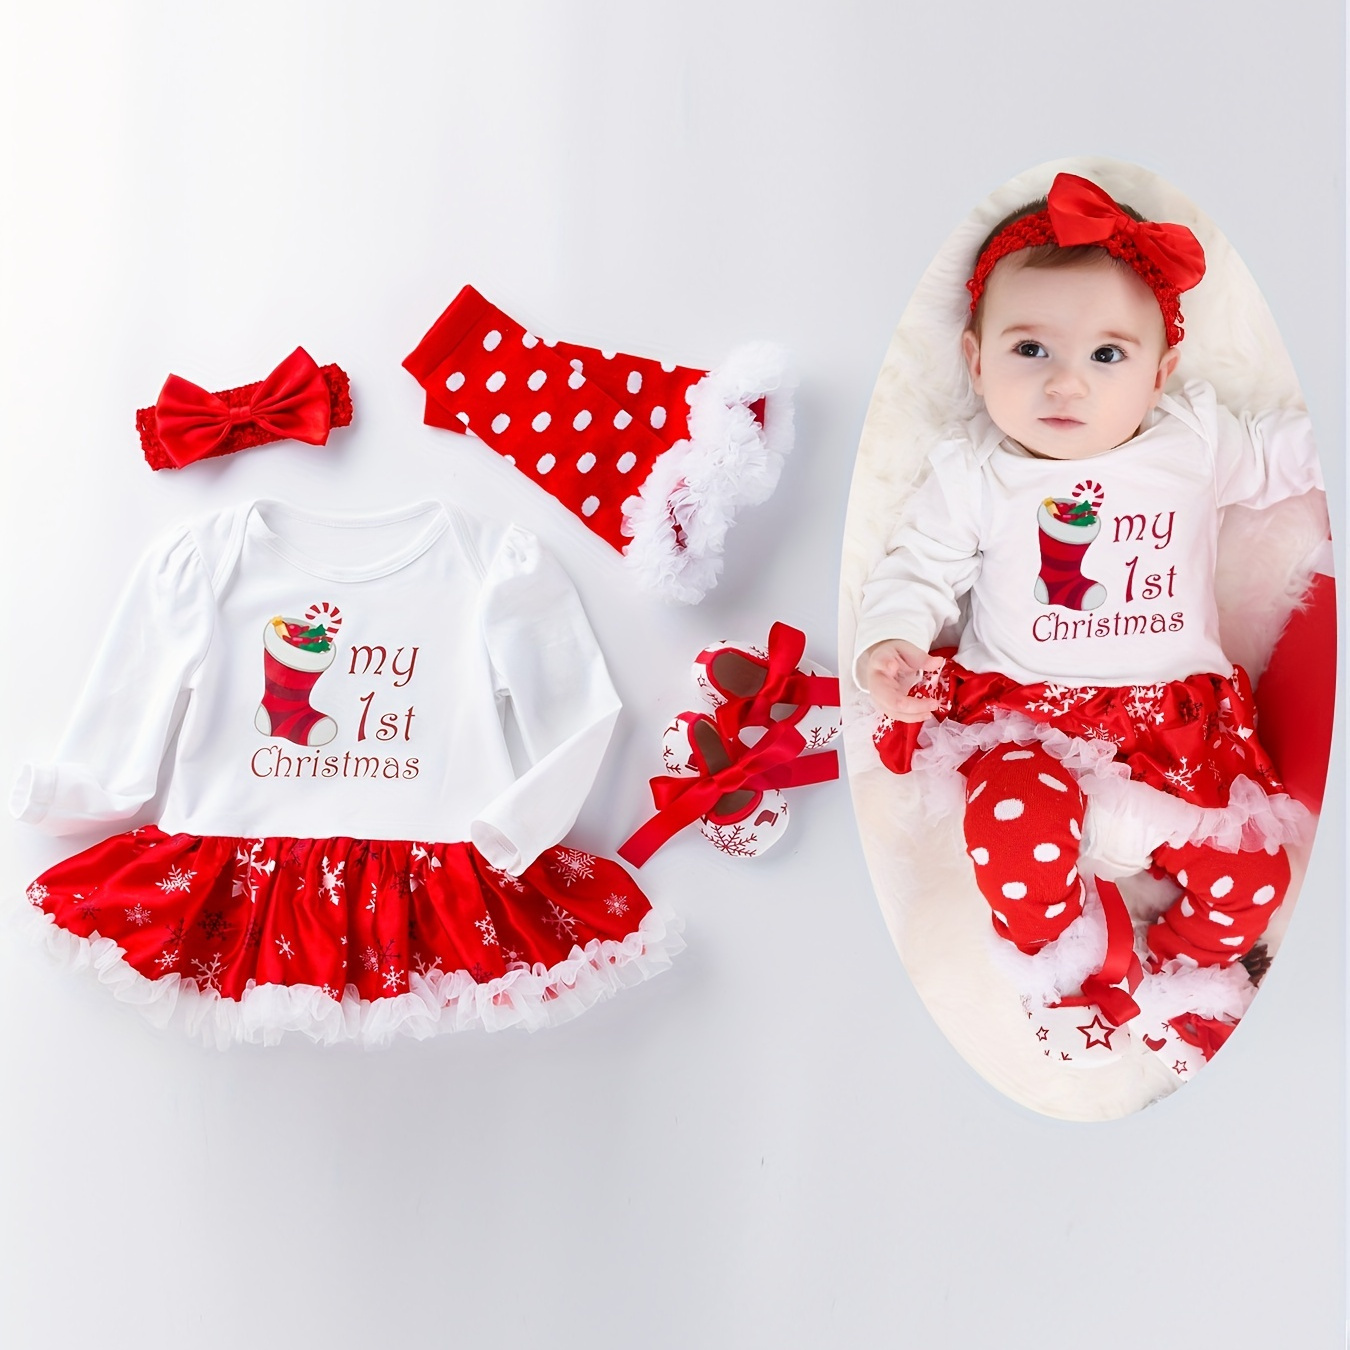 

Newborn Baby's Cut Cartoon Graphic Christmas Outfit, Stockings Long Sleeves Romper Dress Shoes Suit Fashion Party Dress Up Cute Photograph Festival Costume